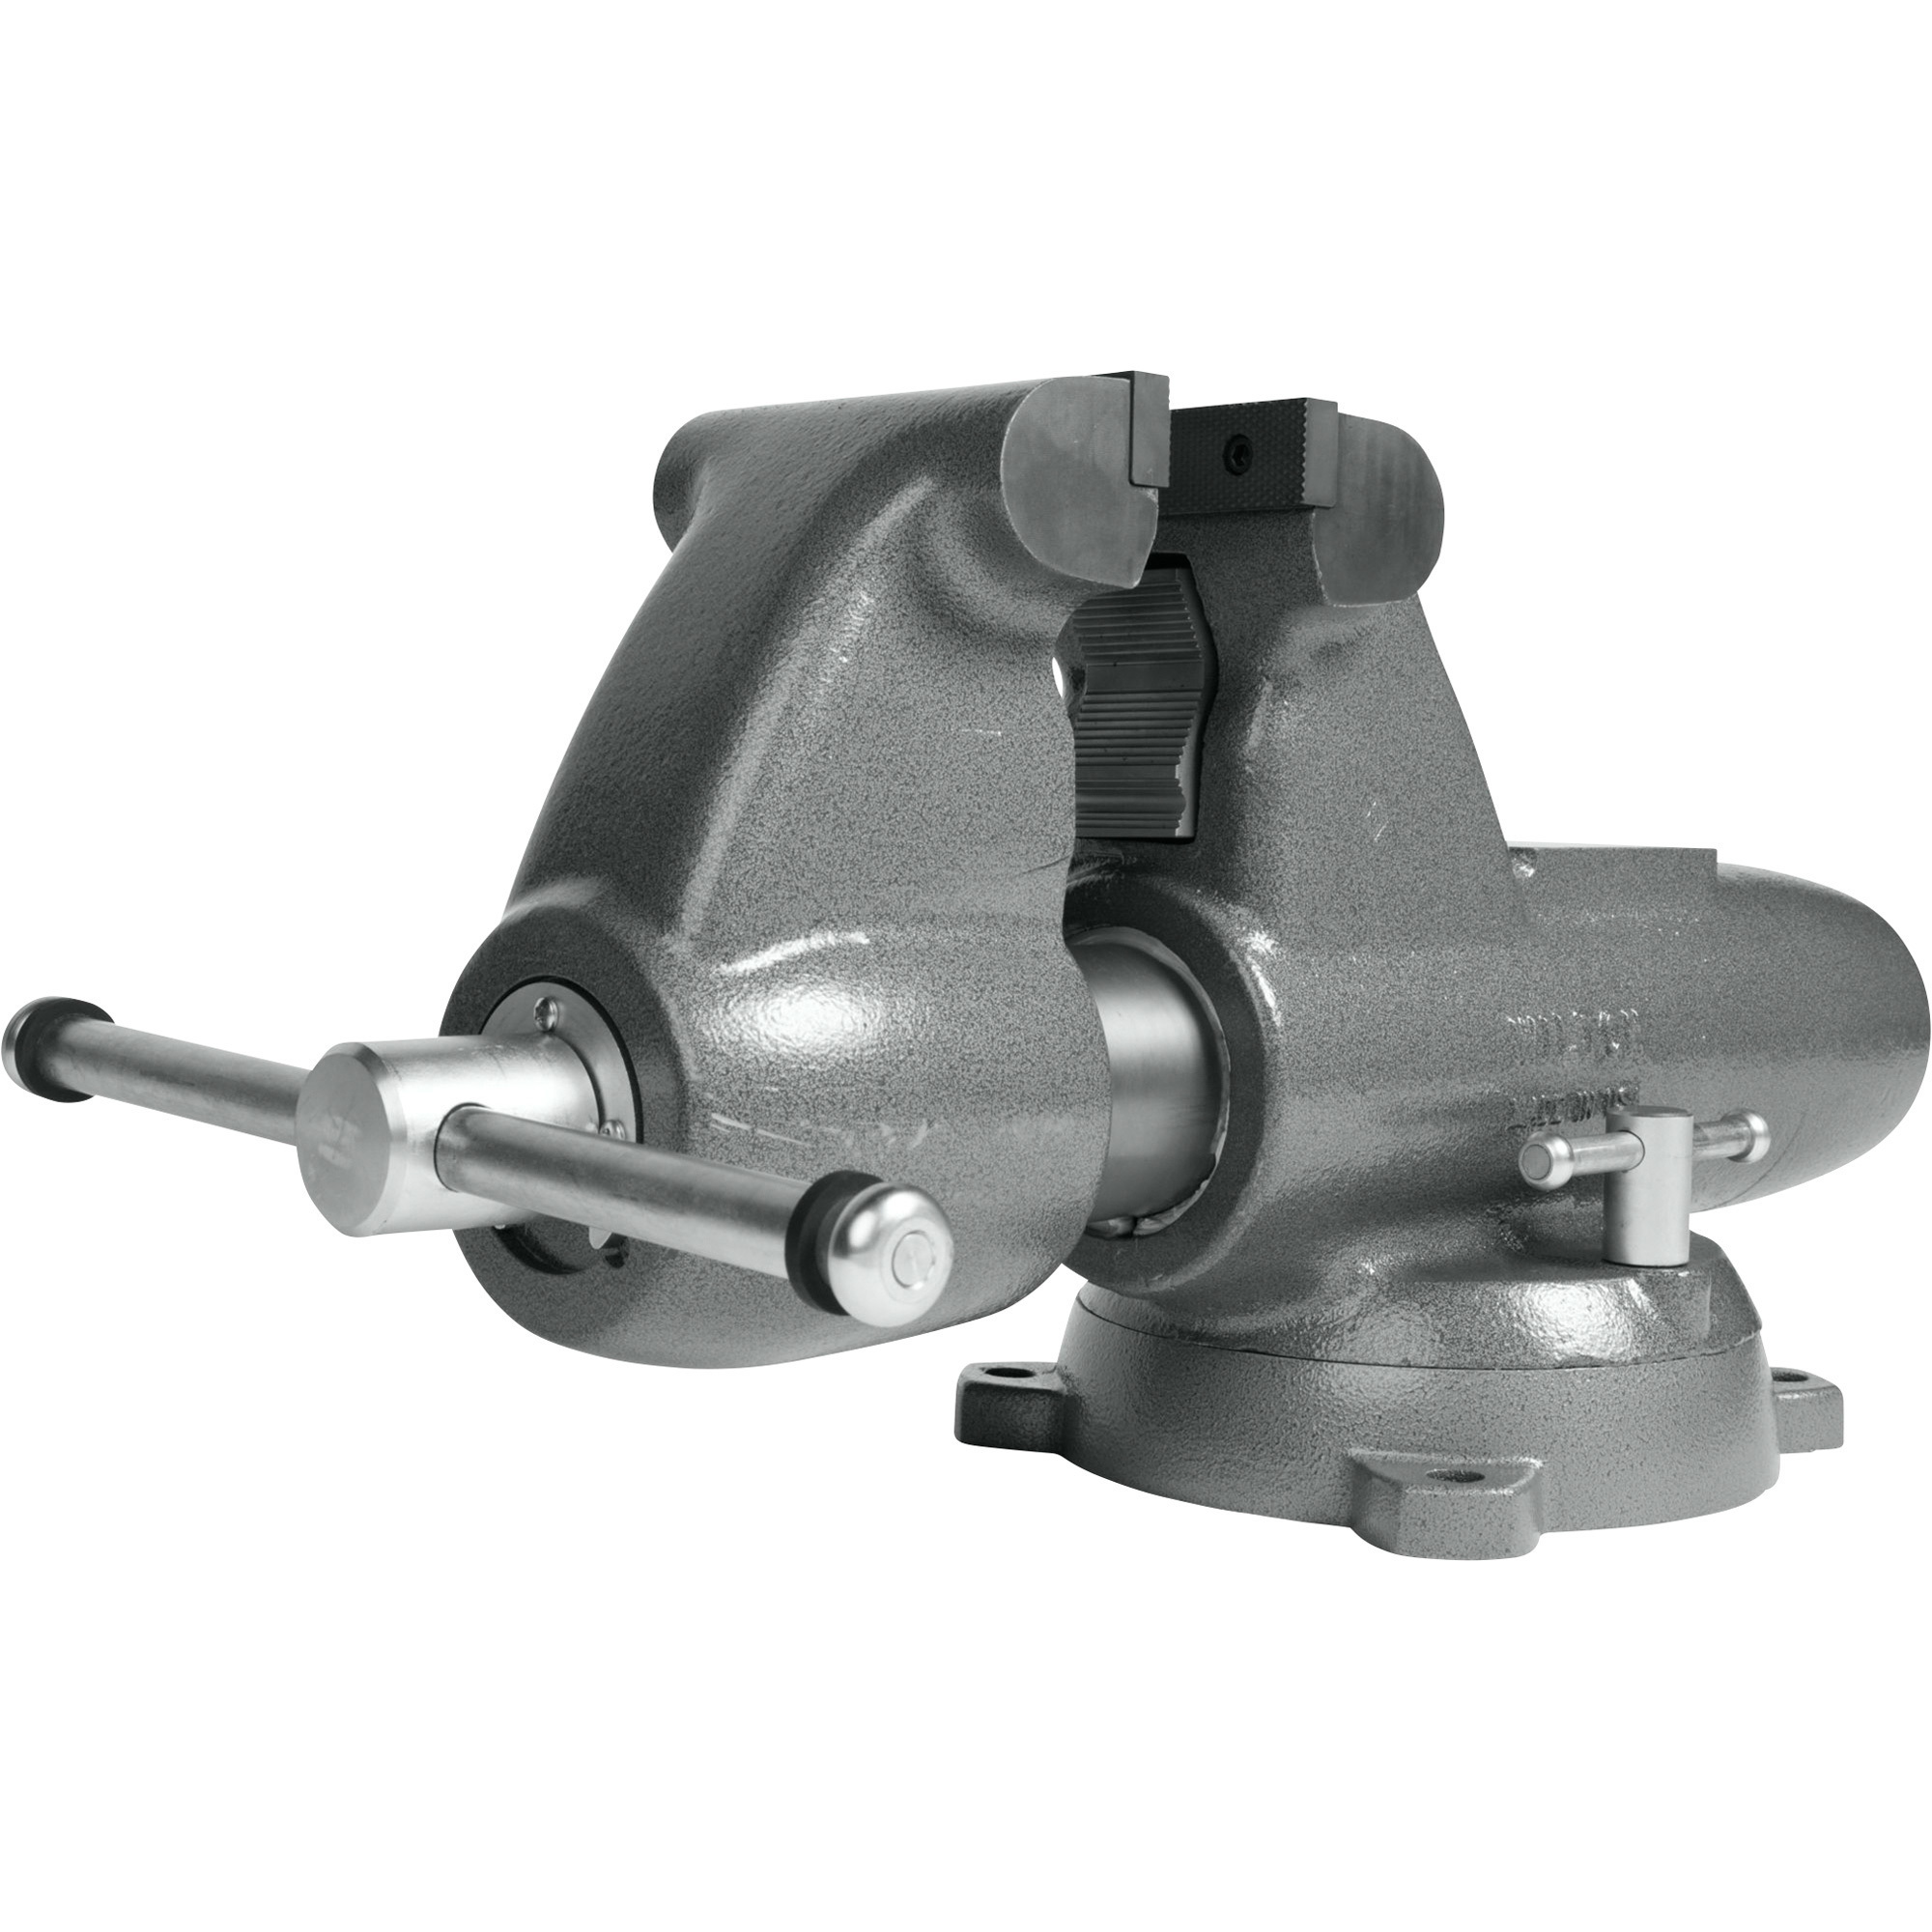 Wilton Combination Pipe and Bench Vise, 6Inch Jaw Width, Model C3